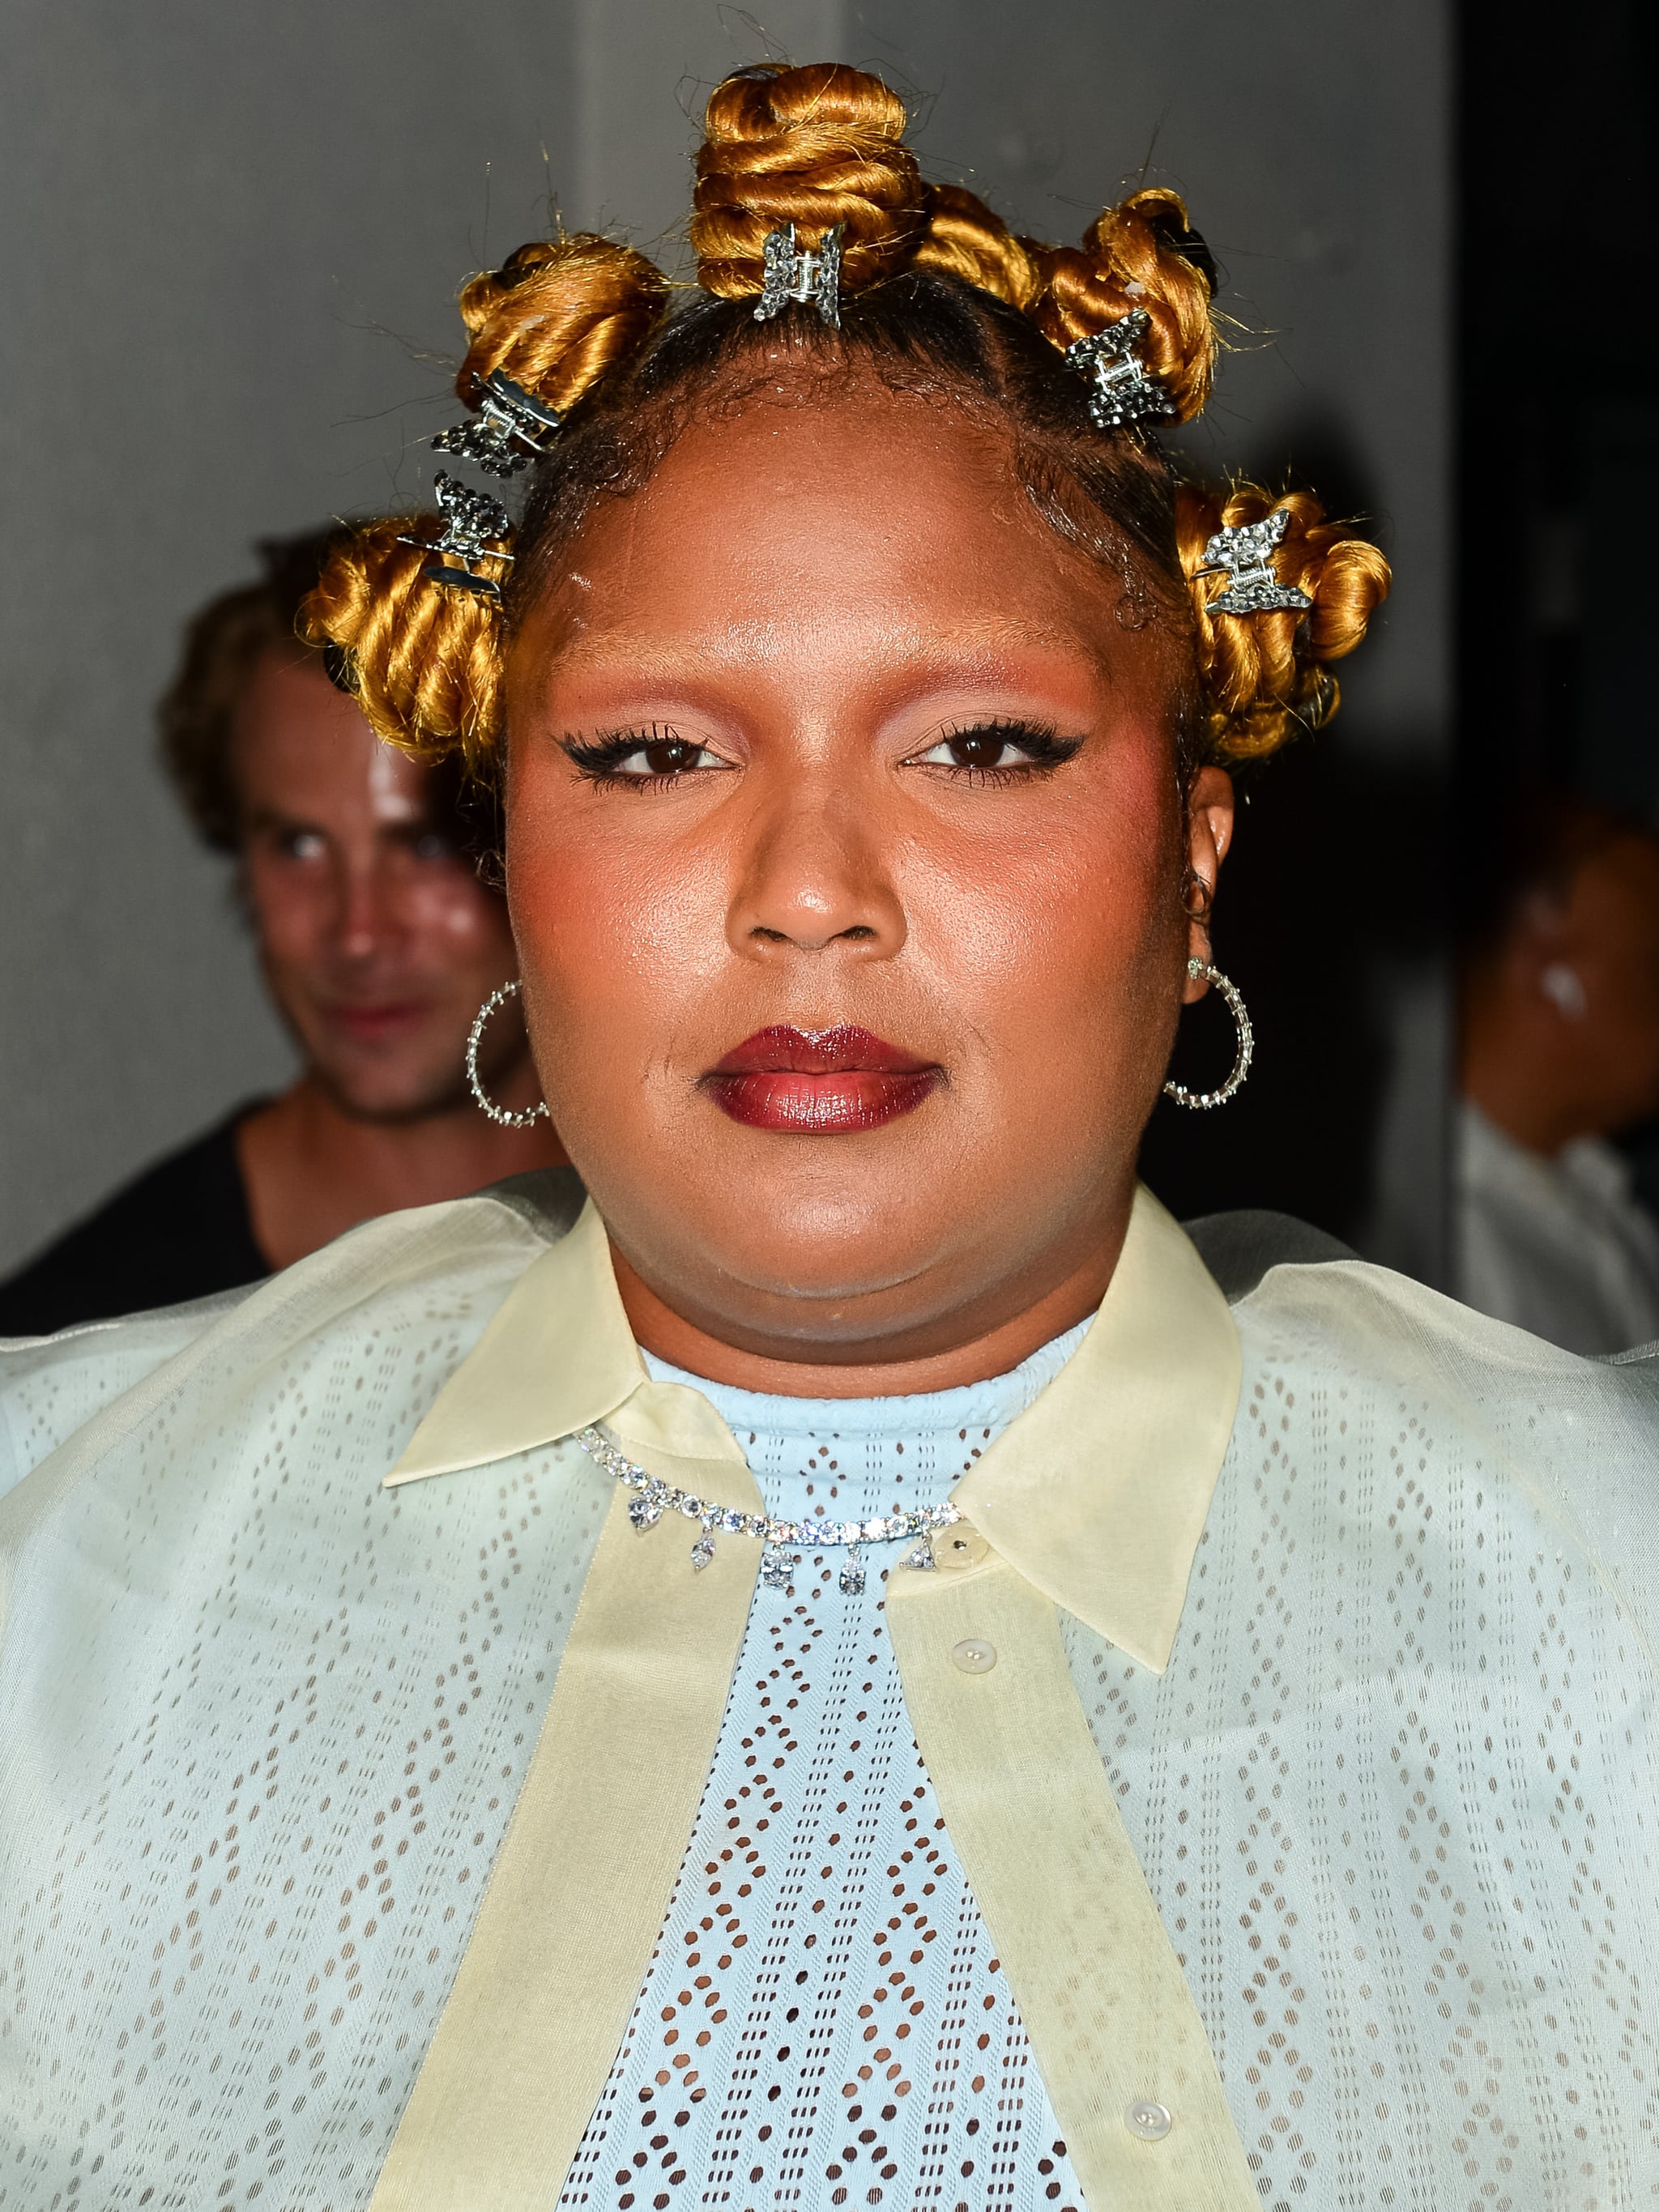 LOS ANGELES, CA - JULY 01: Lizzo is seen on July 01, 2021 in Los Angeles, California.  (Photo by JOCE/Bauer-Griffin/GC Images)